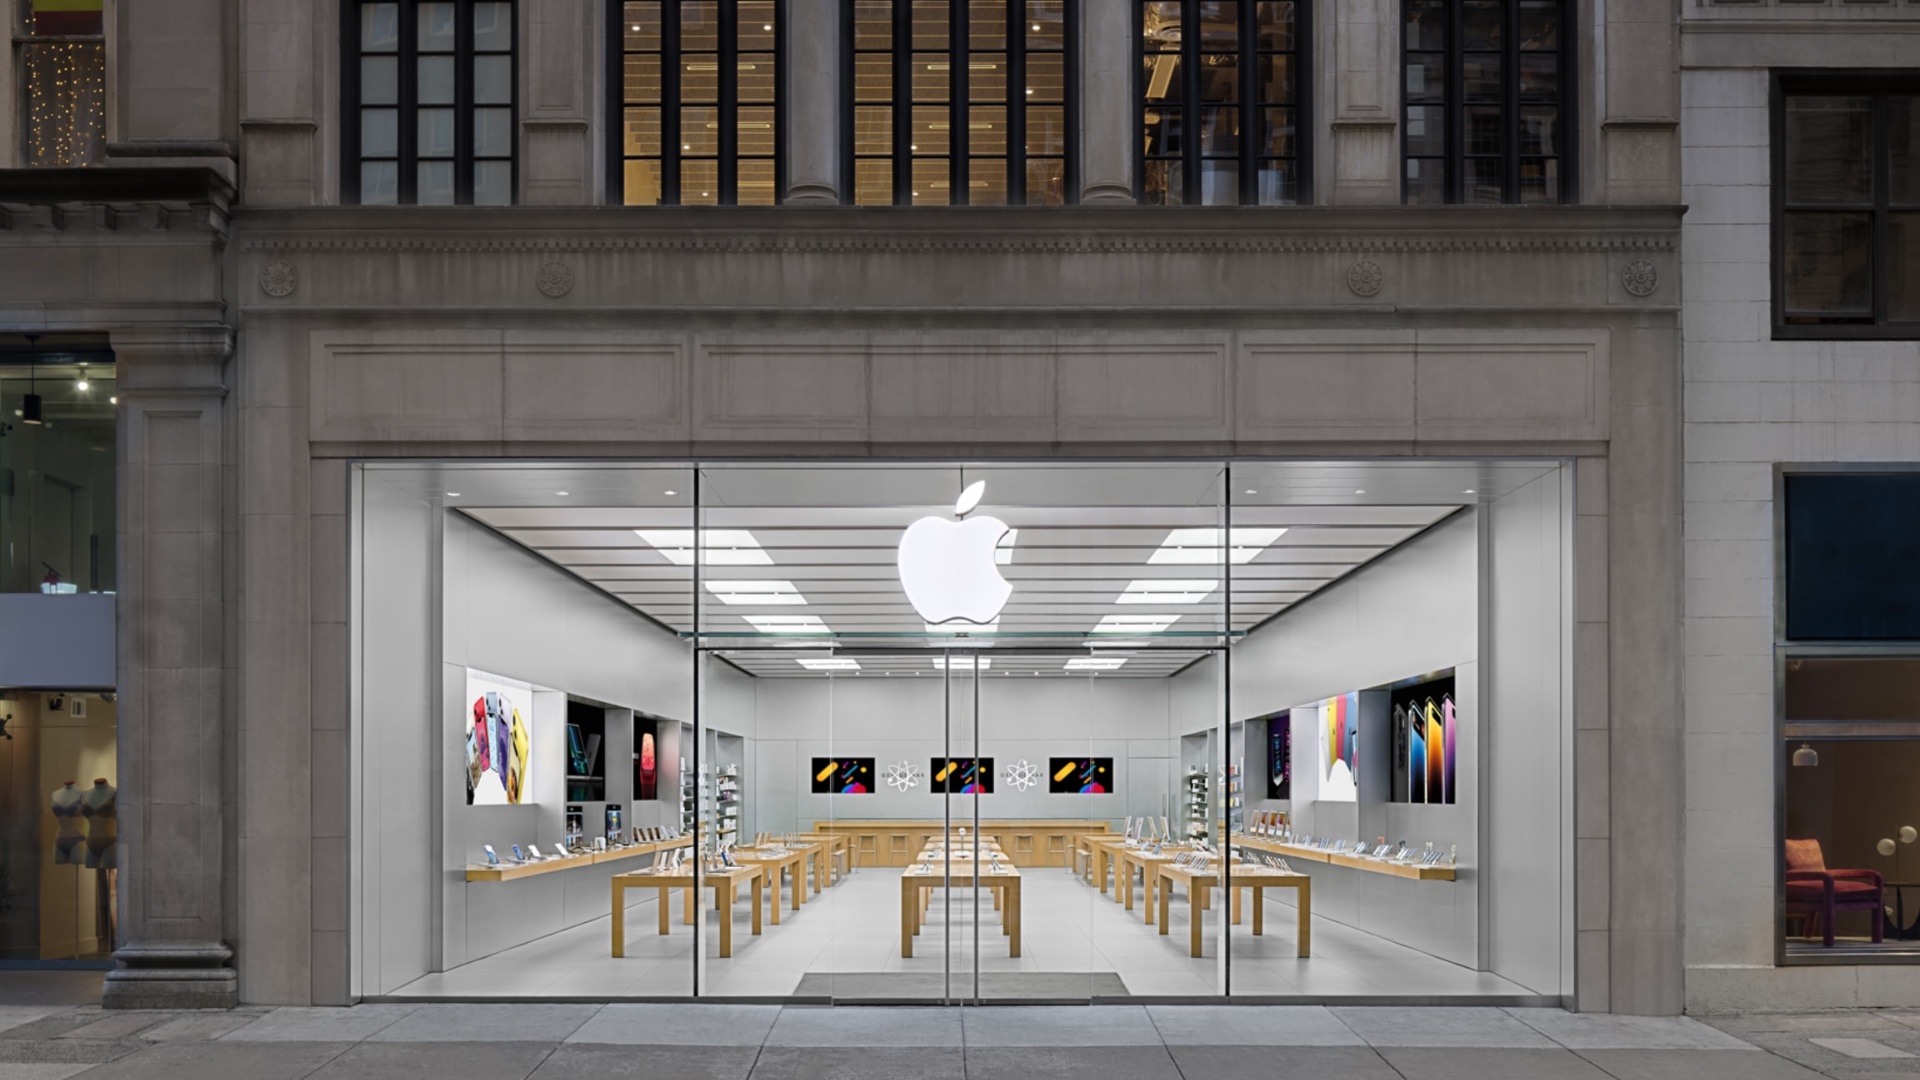 Looting Apple Stores is pointless, as these people quickly found out